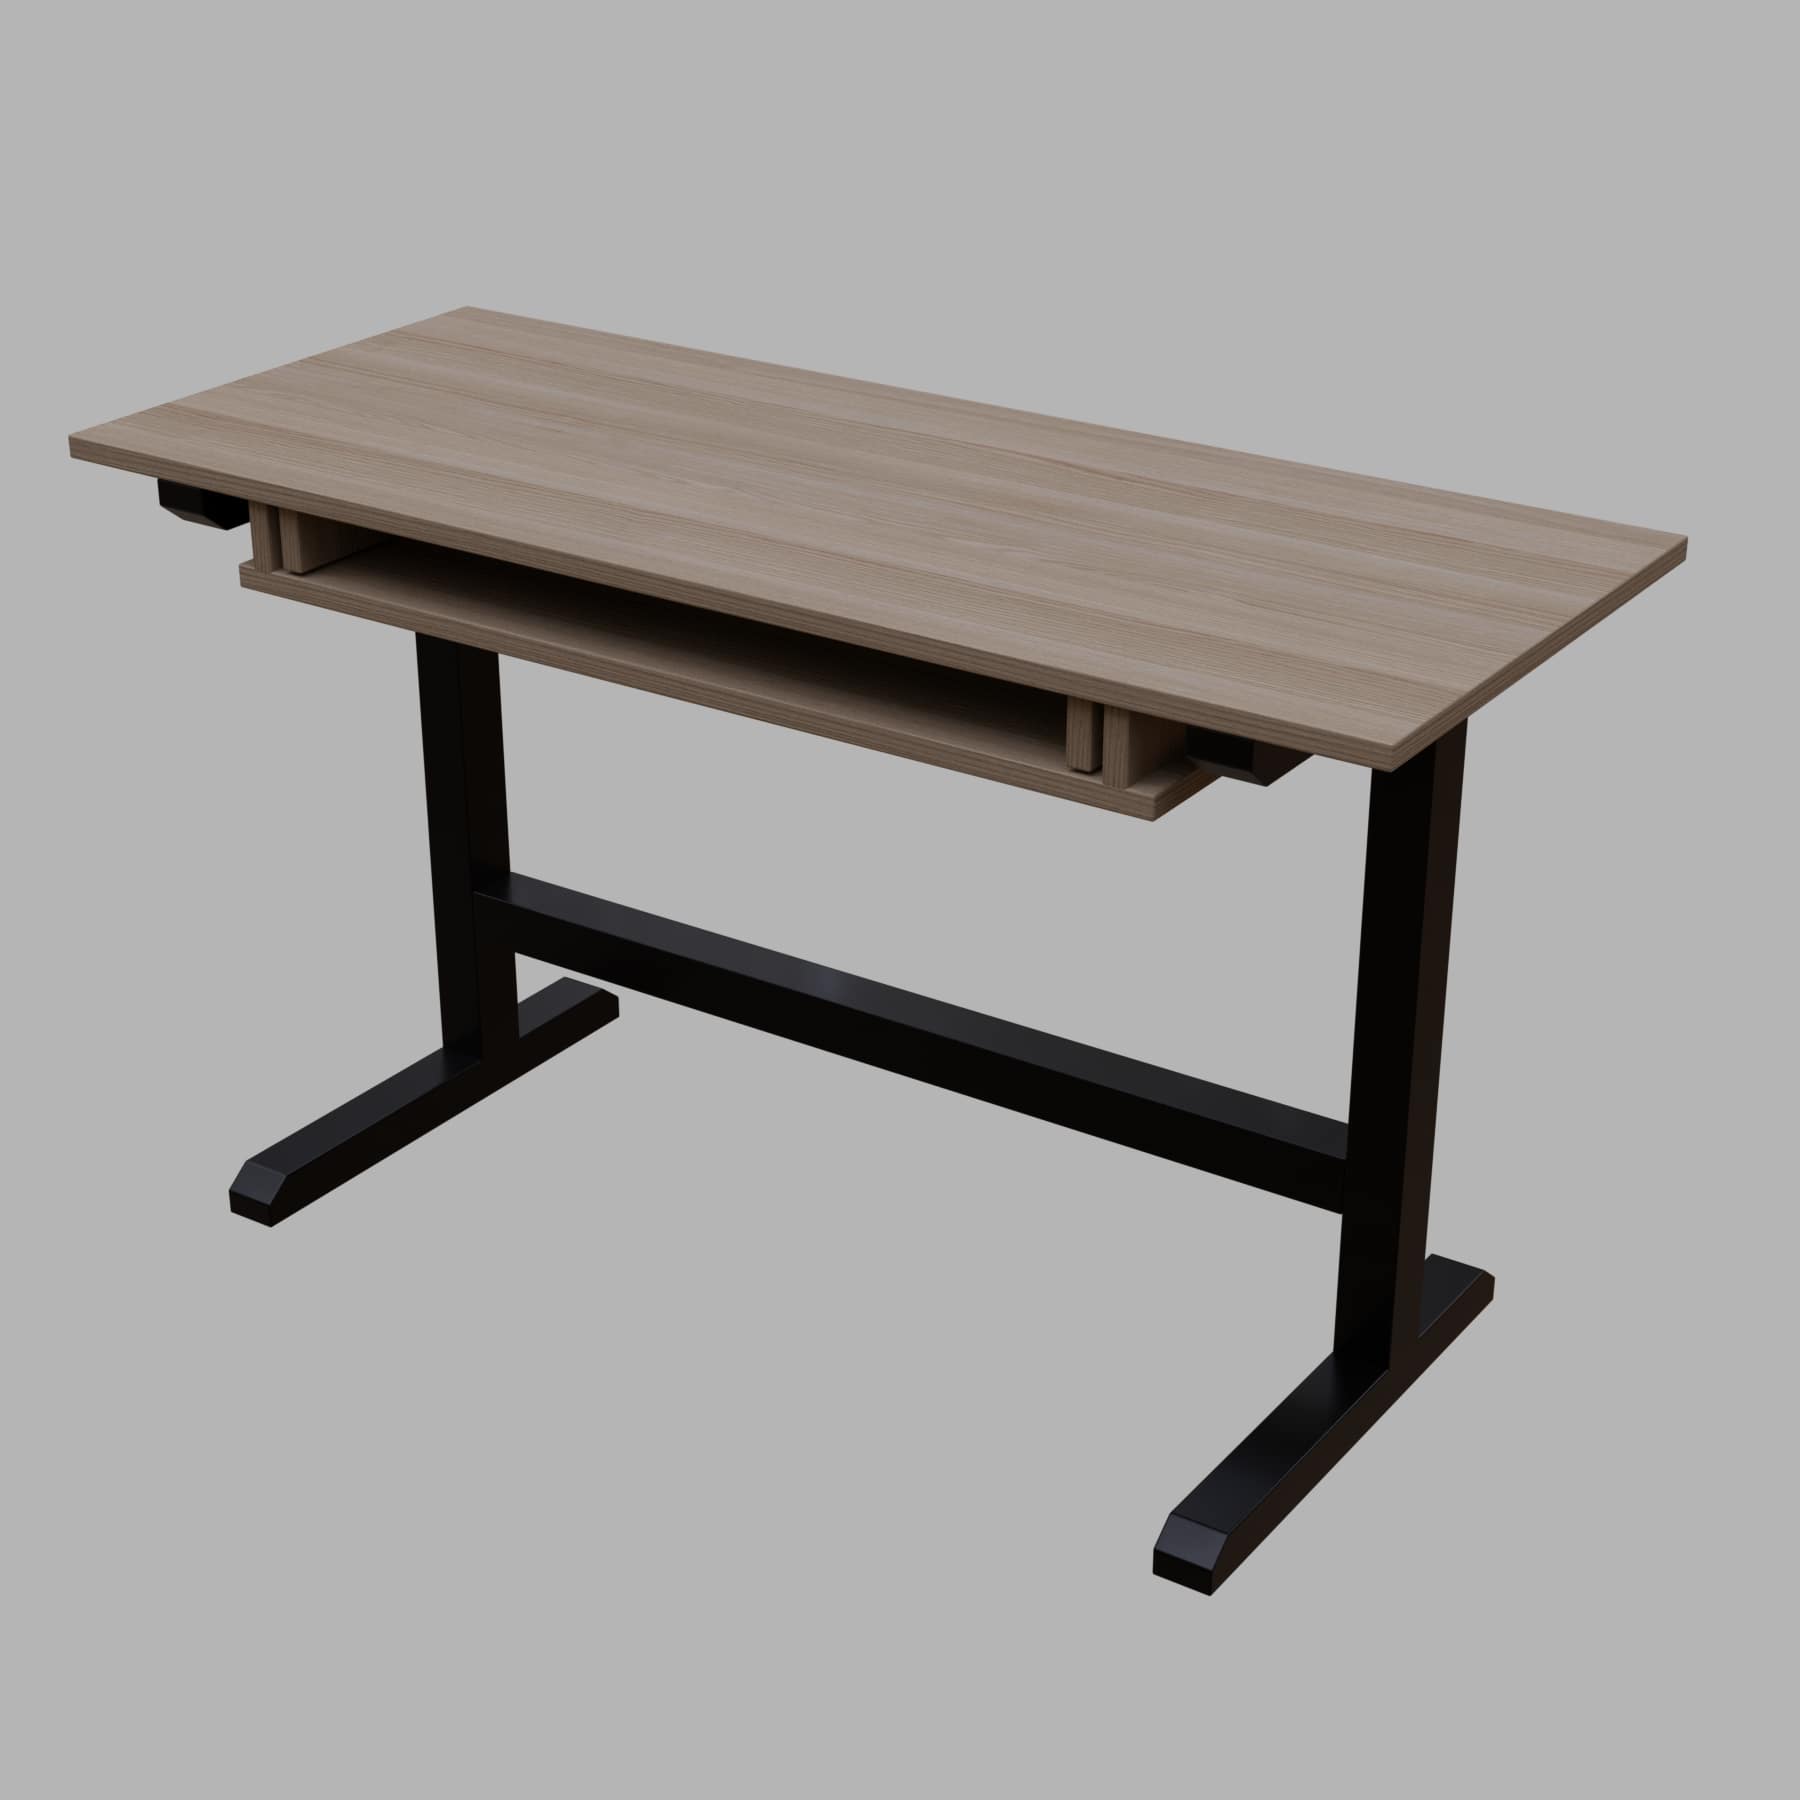 Zinnia Study Table with Keyboard Tray in Wenge Color